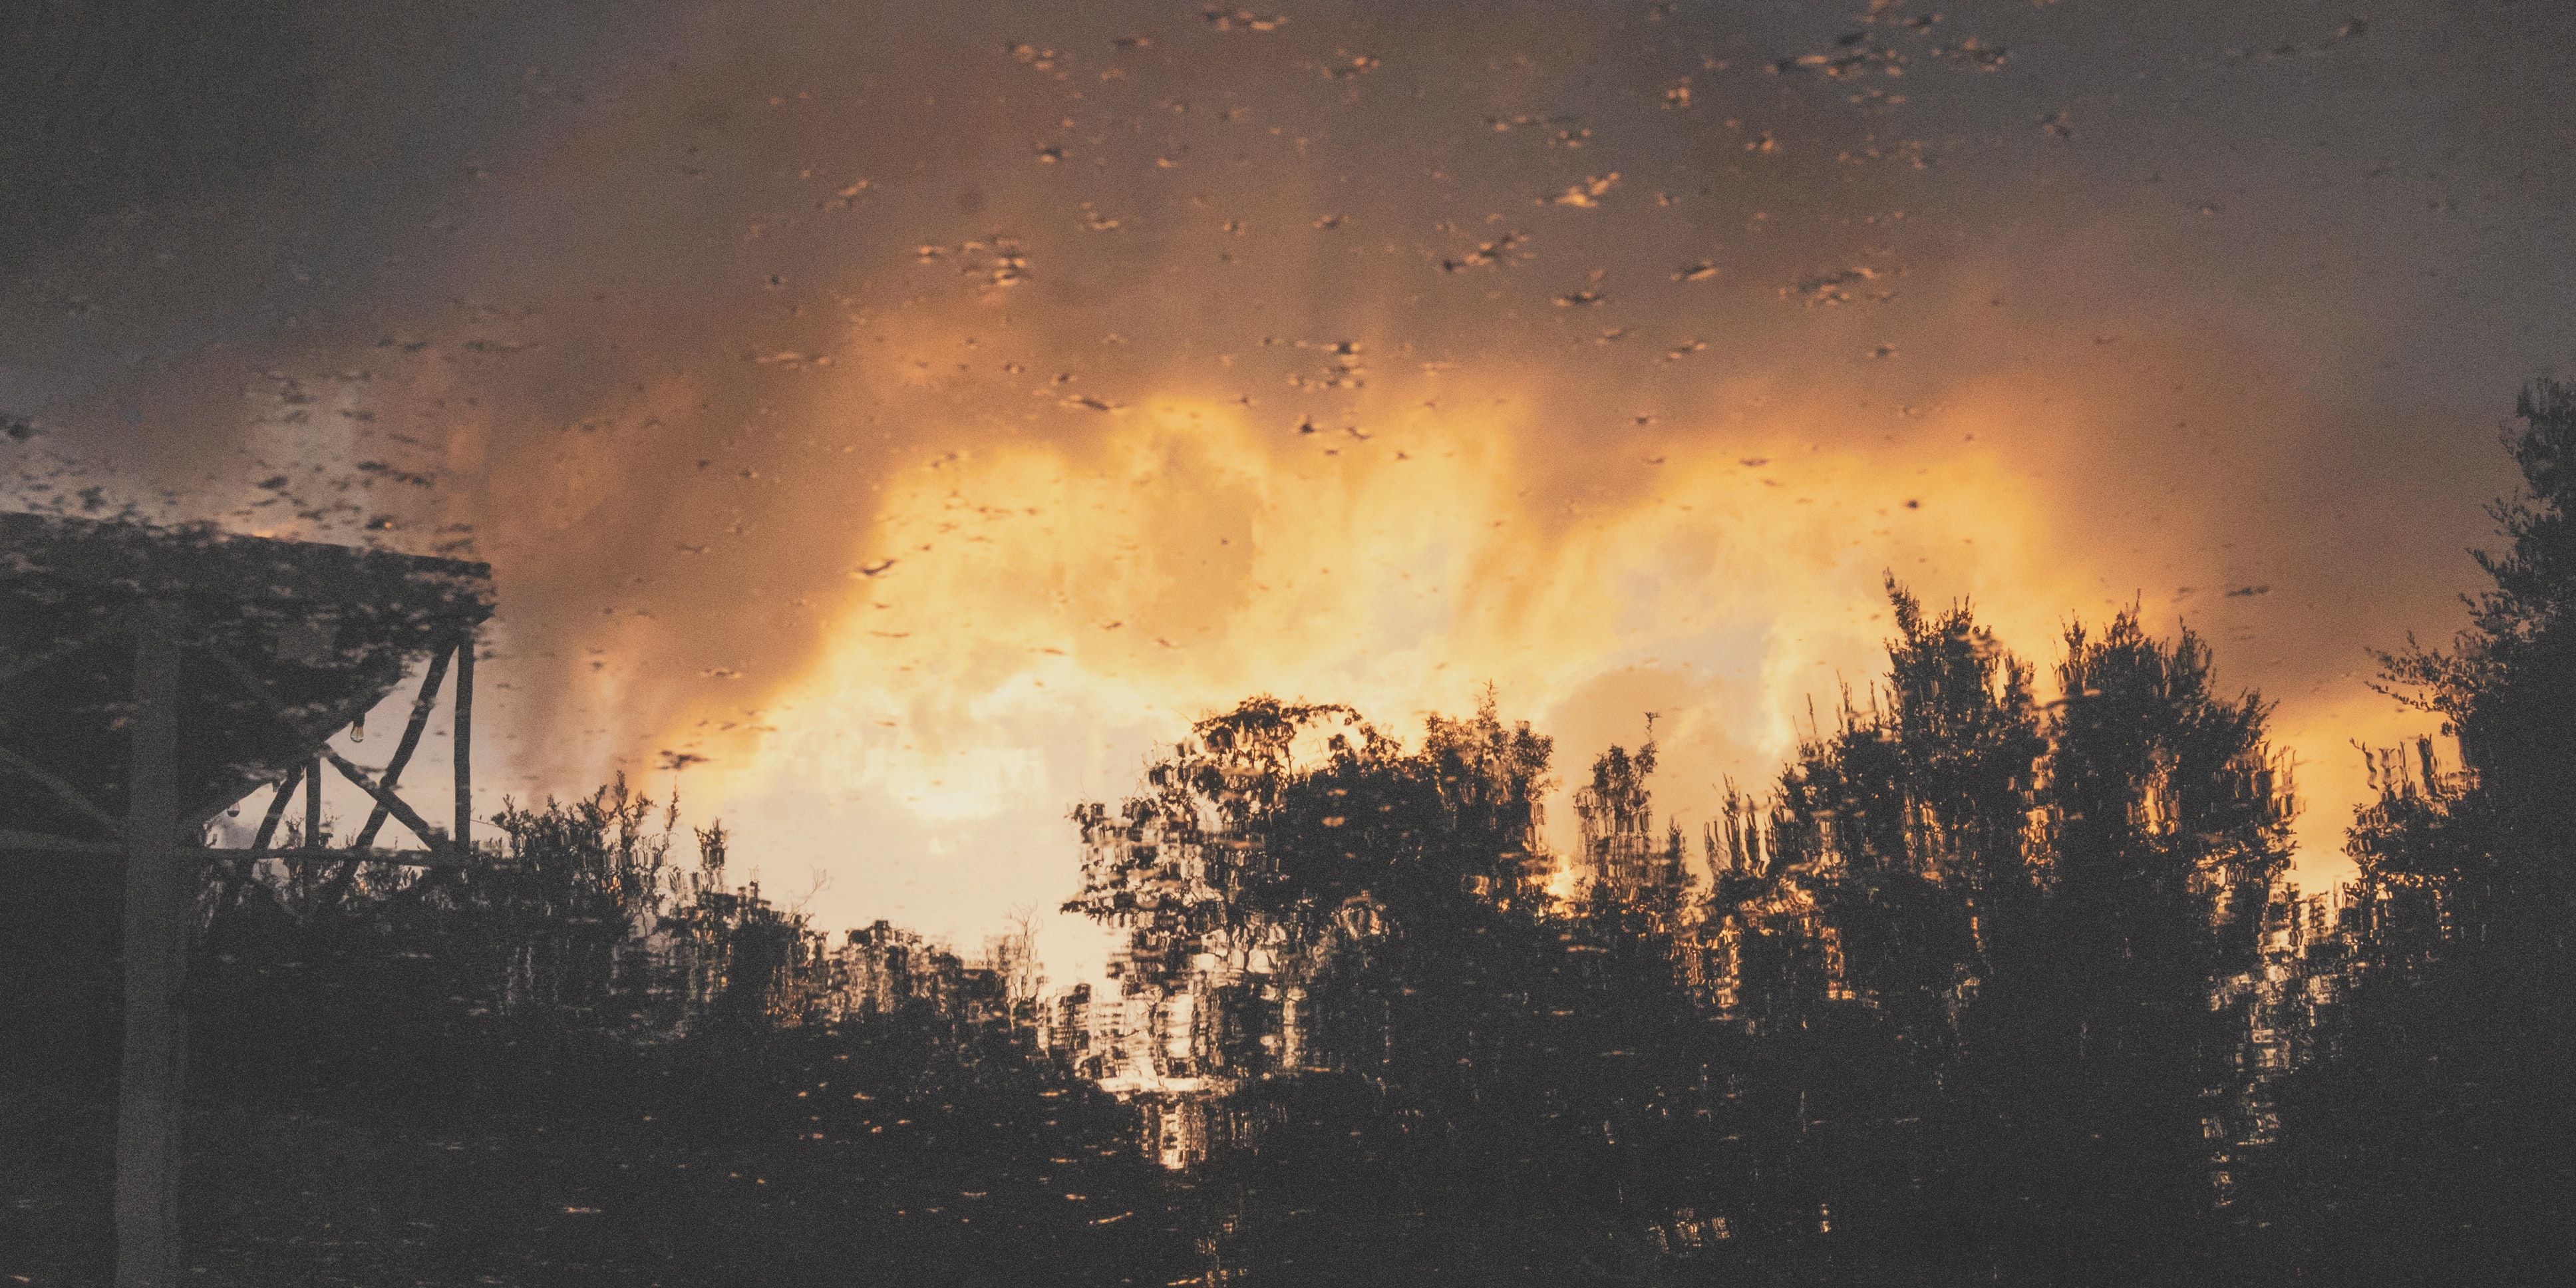 How to Make Good the Damage Caused by a Natural Disaster - sergio torres nUw2nIGeGYY unsplash